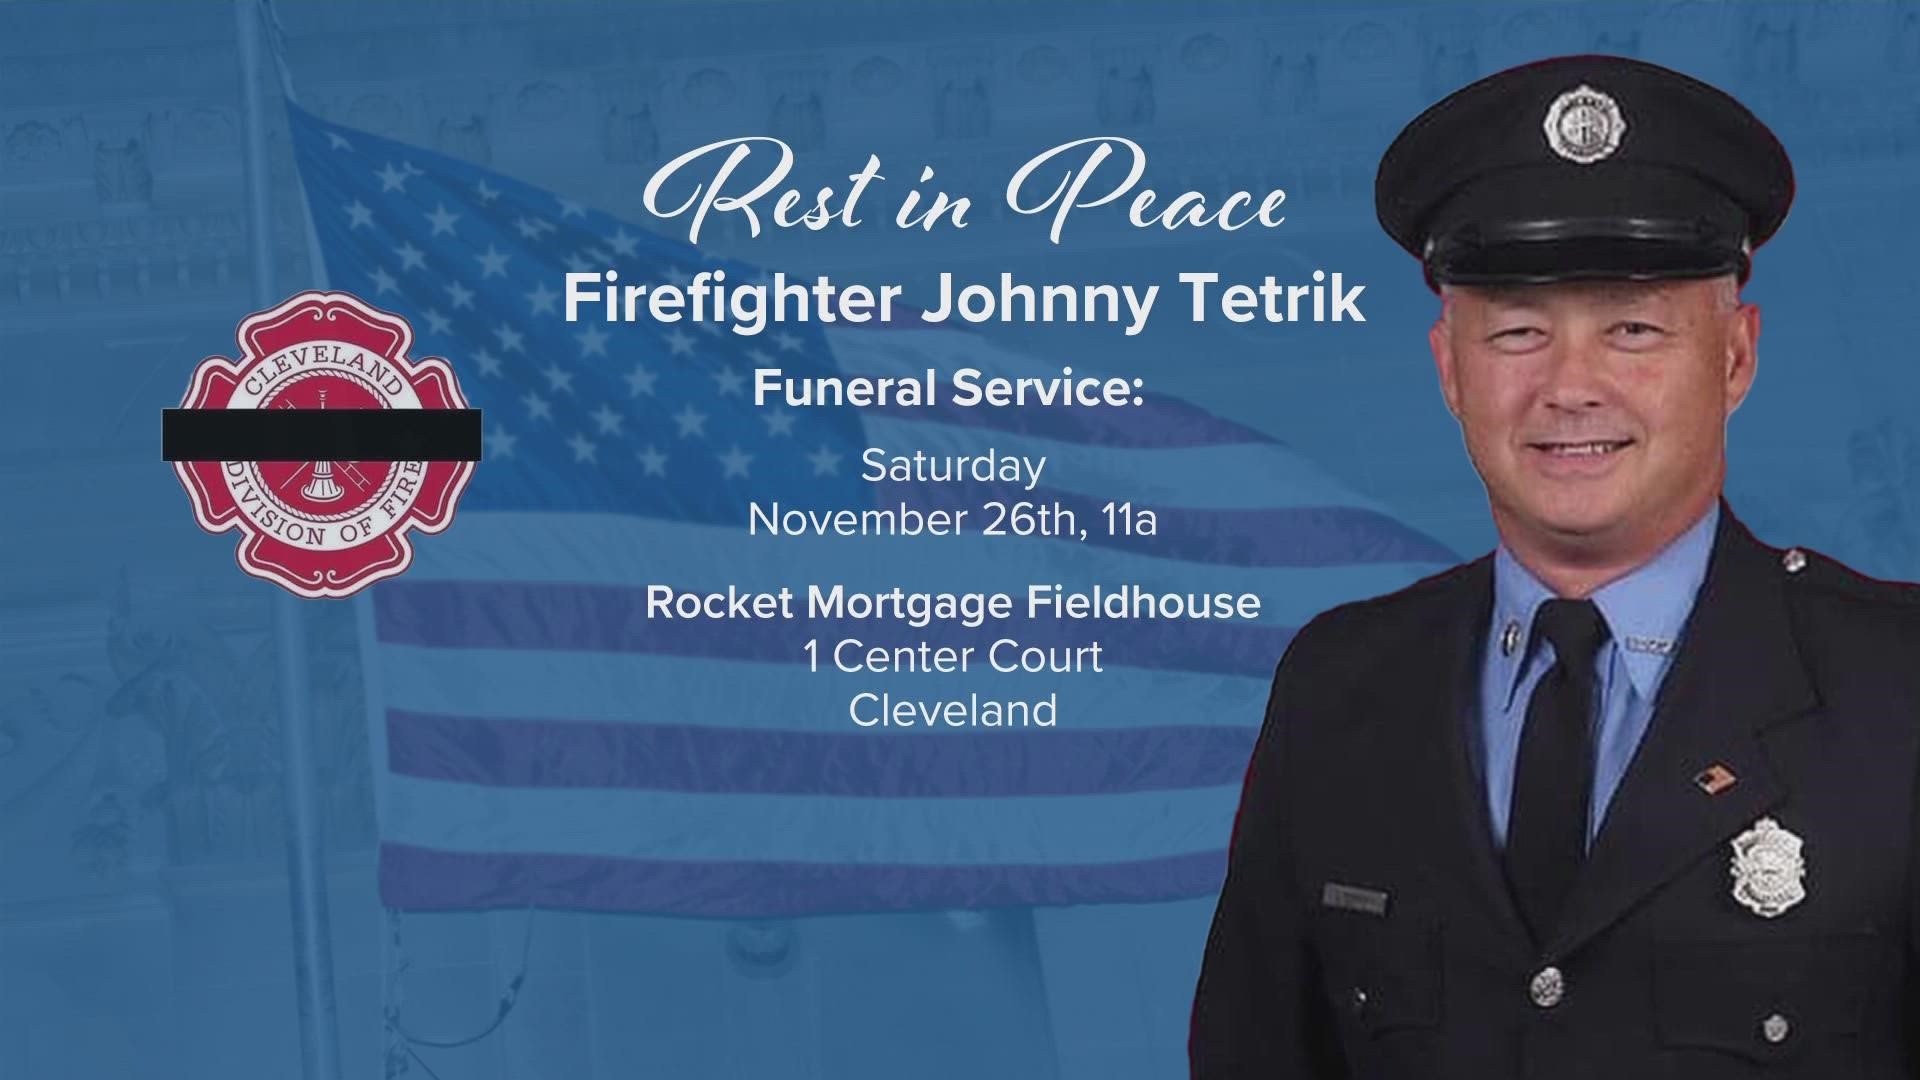 The funeral service will be held on Saturday, Nov. 26 at Rocket Mortgage FieldHouse at 11 a.m.